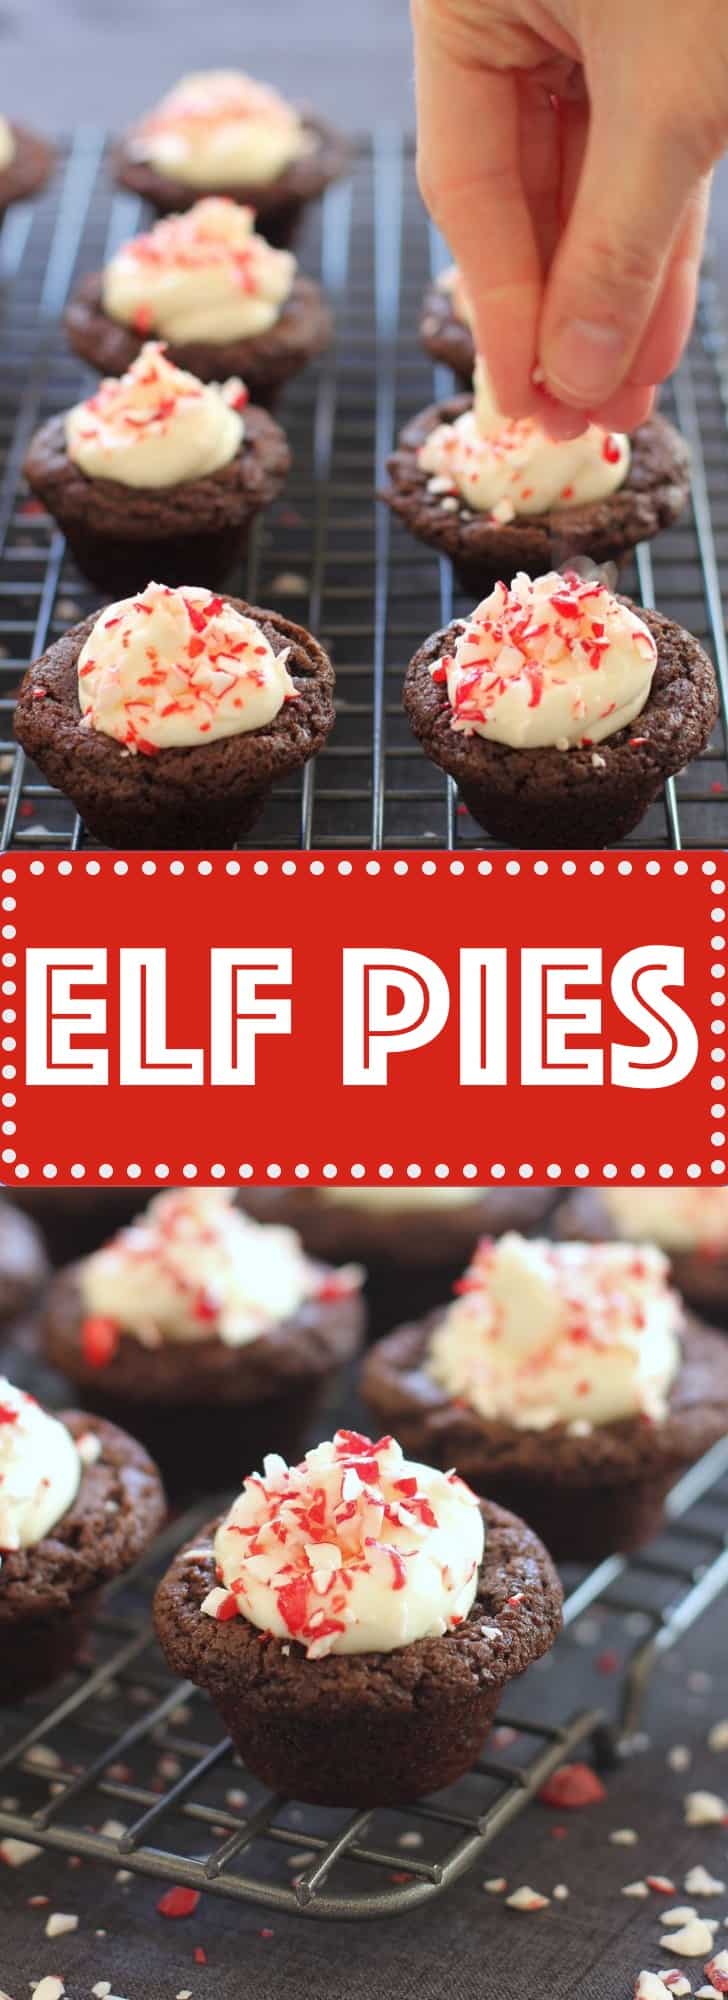 Chewy bite-sized brownies topped with a light, fluffy frosting and crushed candy cane. Designed for Santa's elves, but well-loved by all!